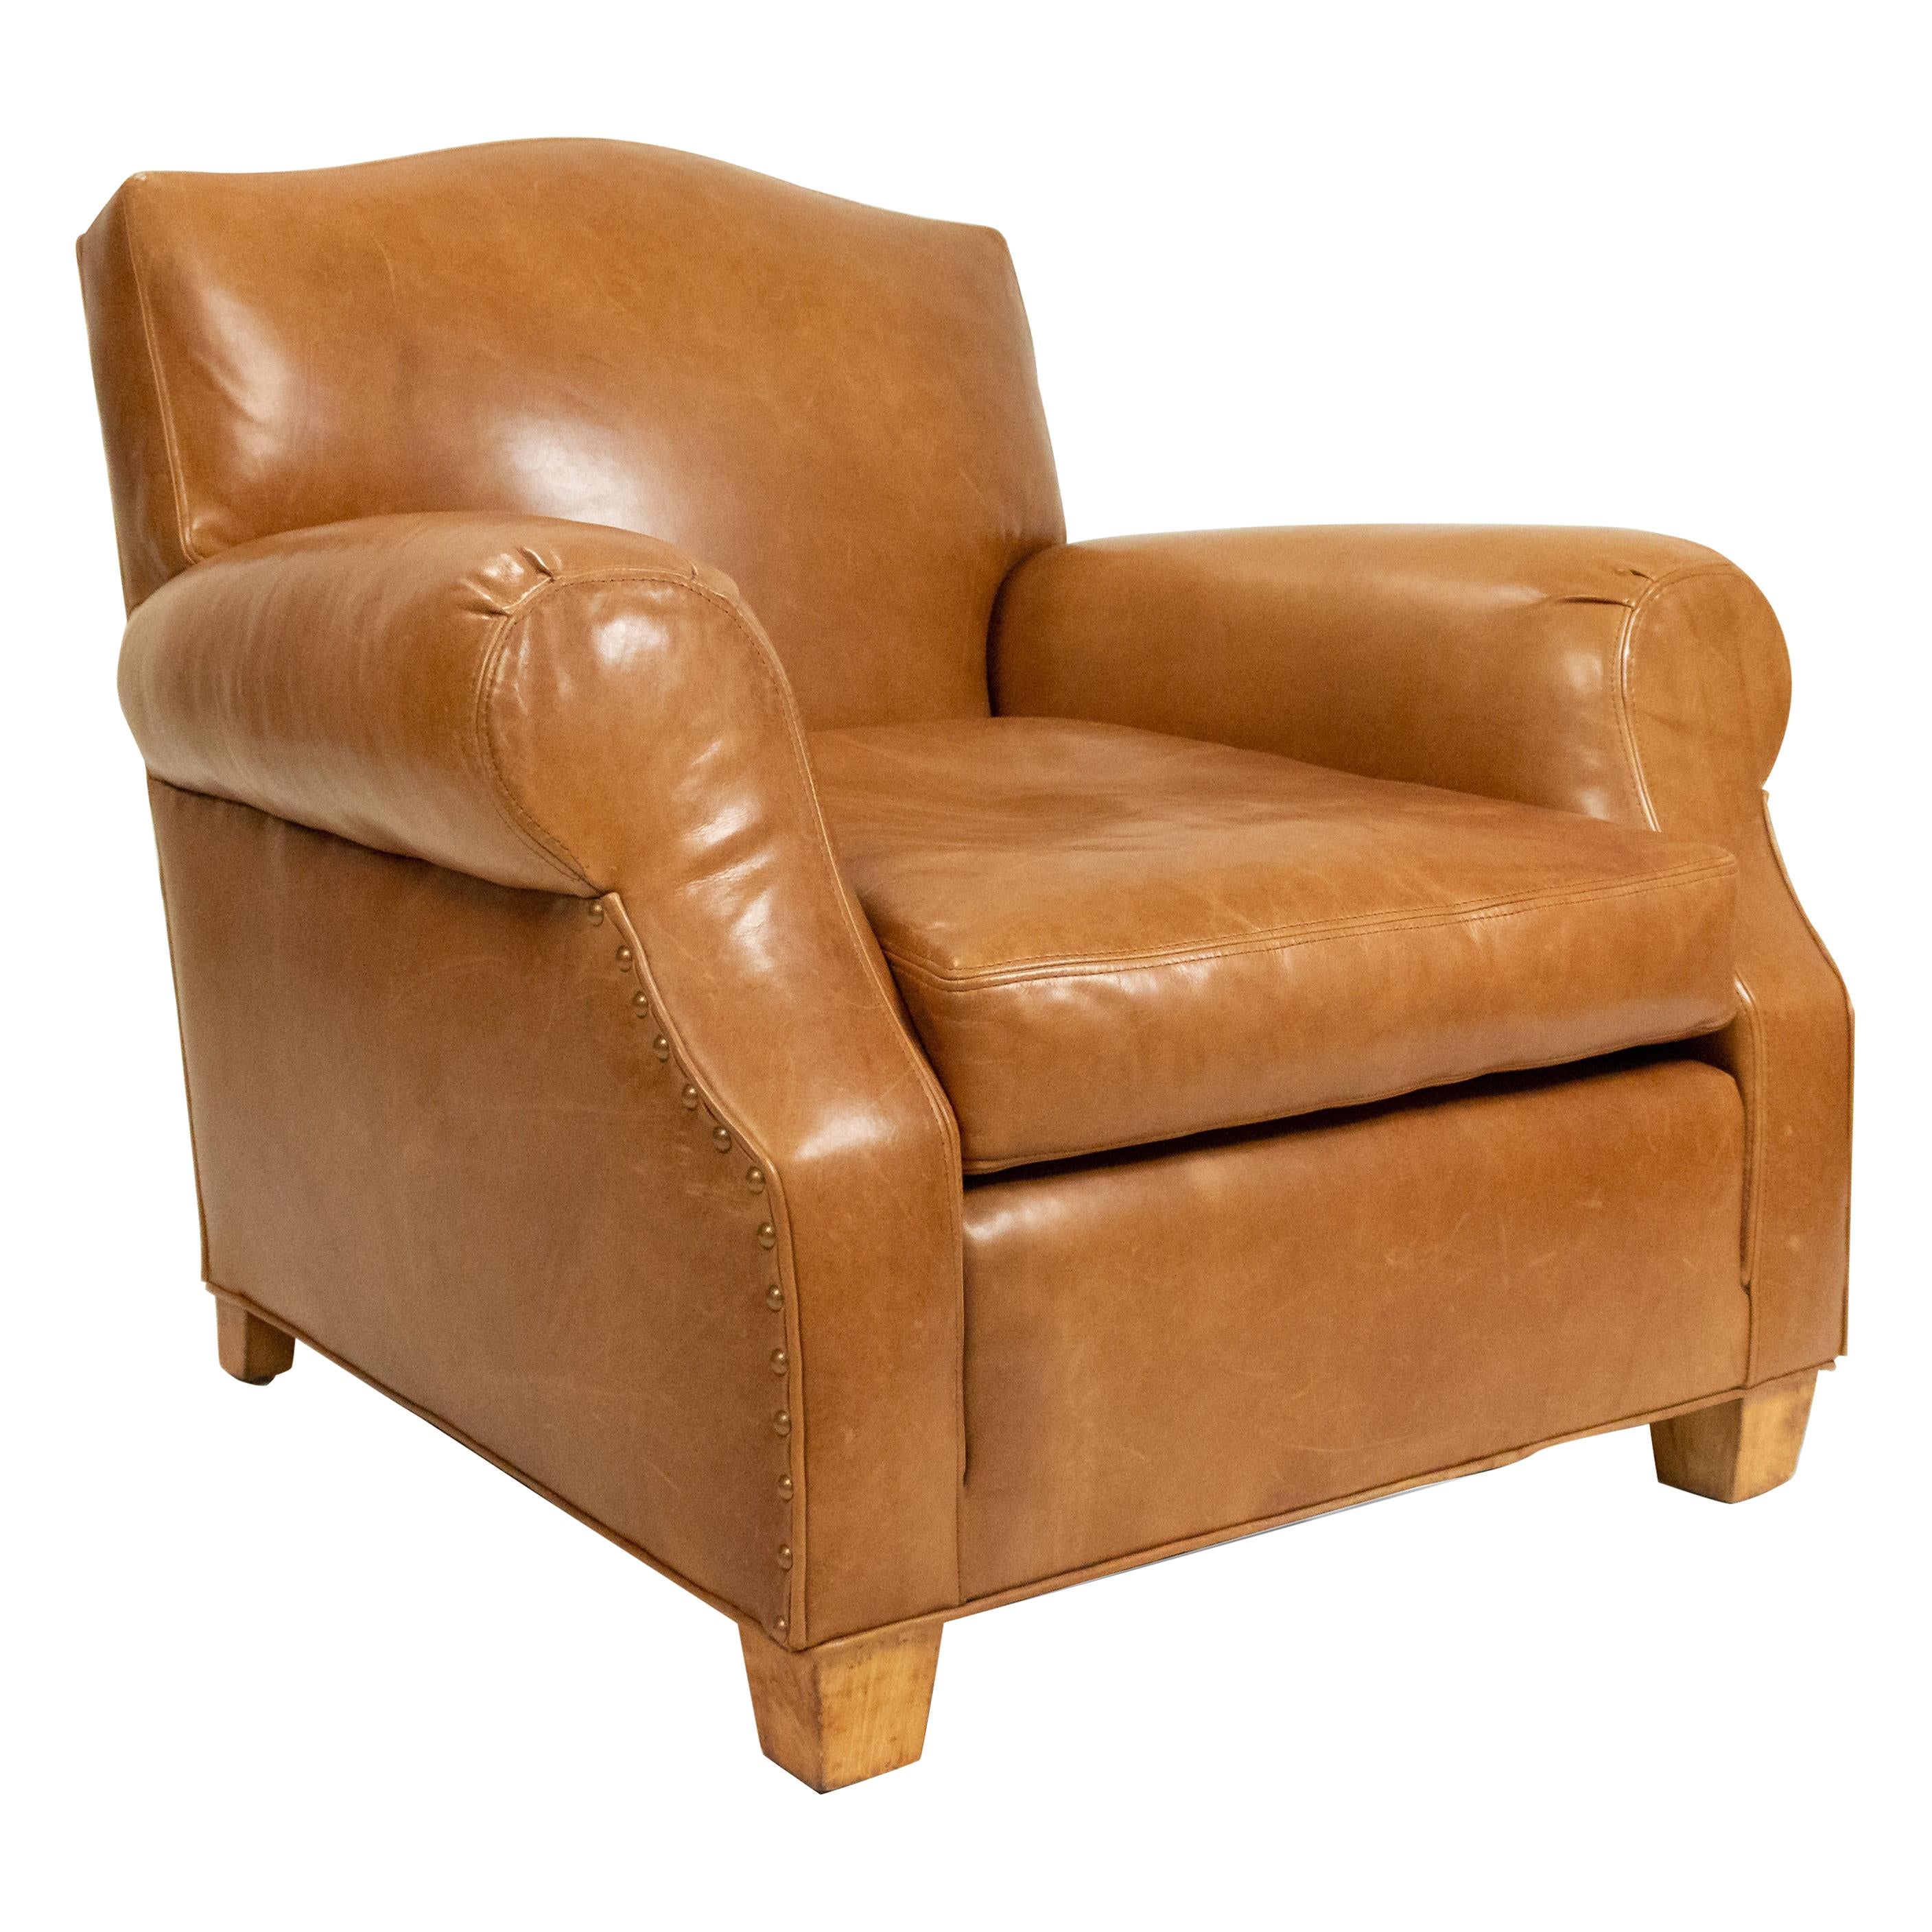 French Art Deco Style Tan Leather Club Chairs